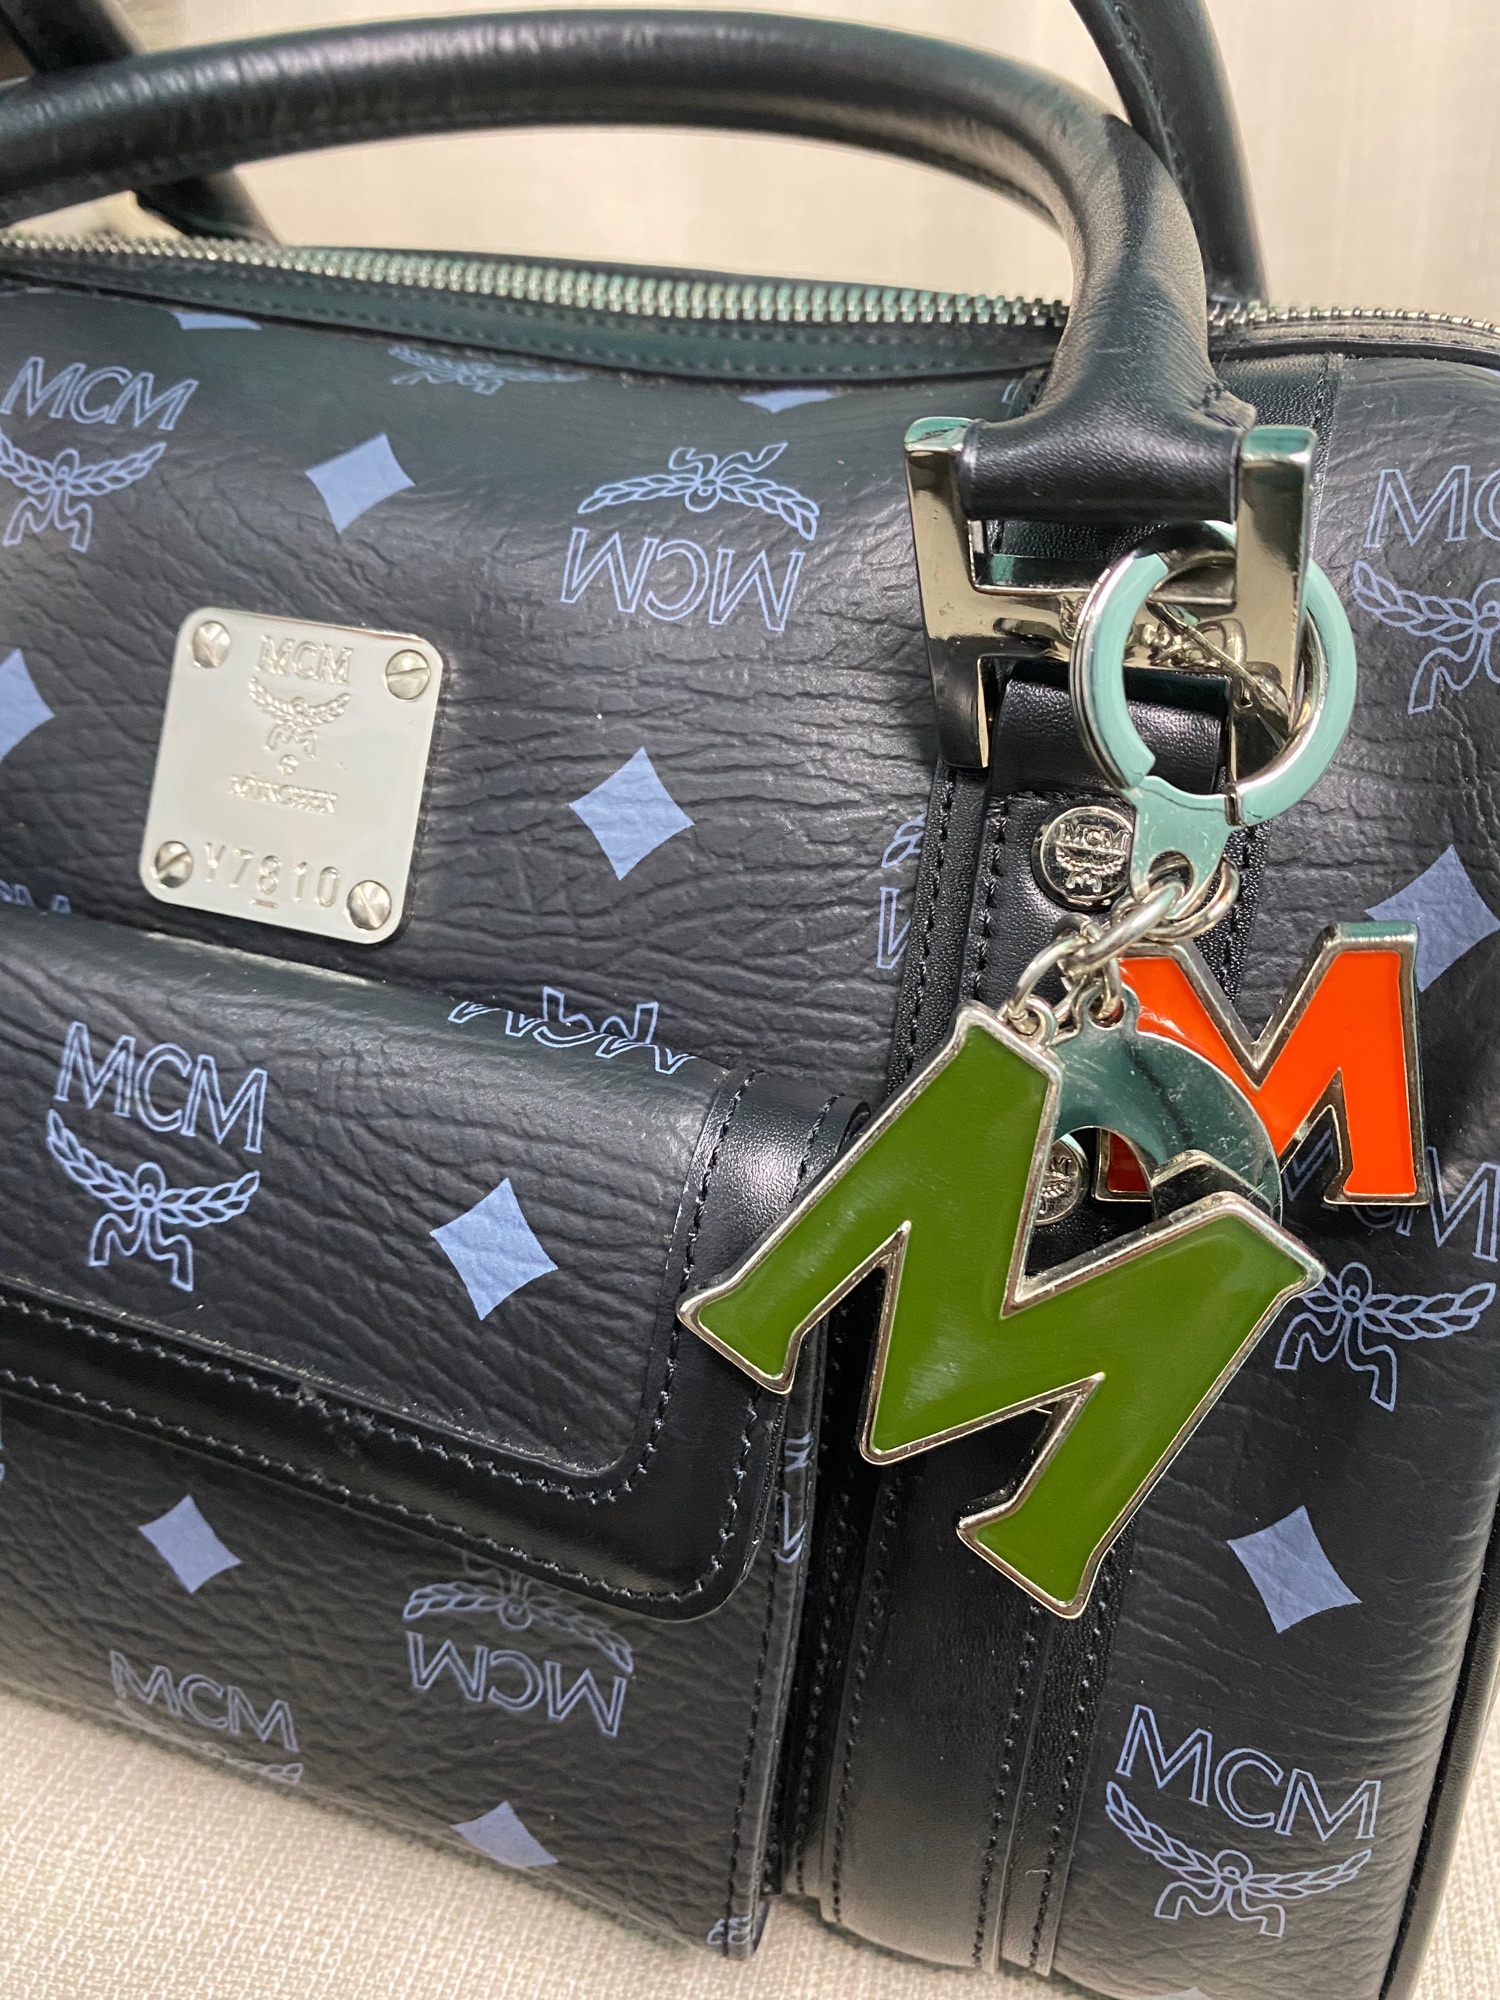 Authentic MCM Doctor's Bag MCM Doctor's Bag Good quality genuine leather  Silver hardwares With Code With MCM bag charm MCM zipper pullers Hologram  inner lining